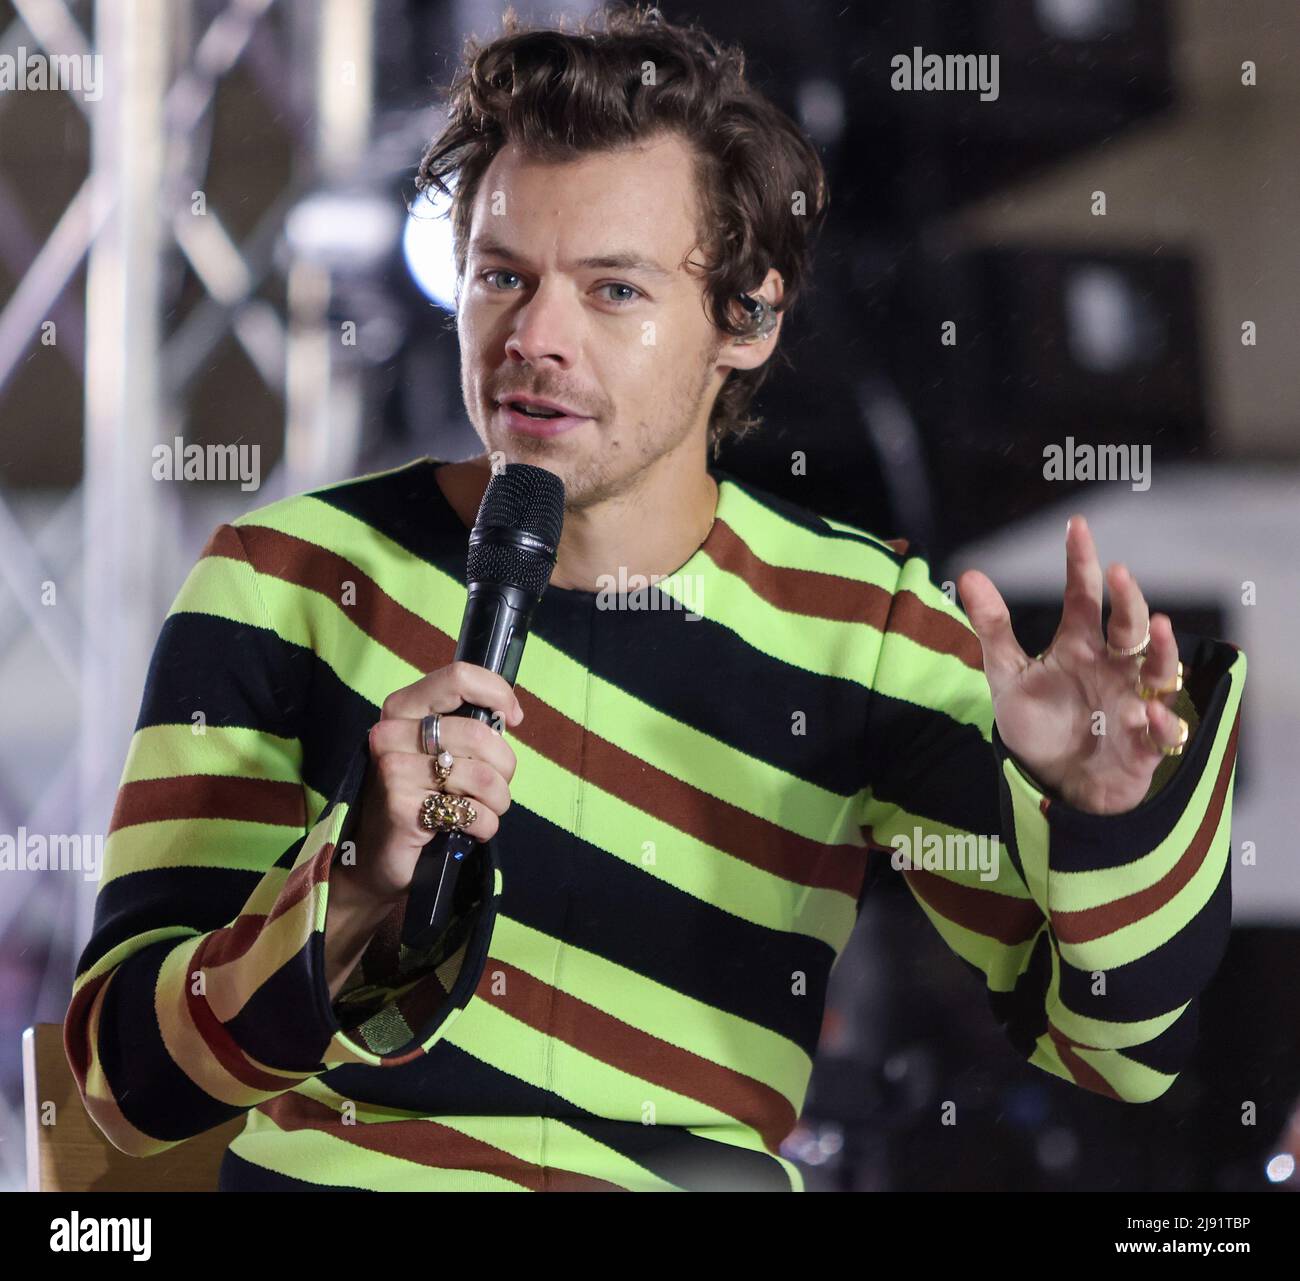 NEW YORK - MAY 19: Singer Harry Styles onstage during NBC's 'TODAY' Show at Rockefeller Plaza on May 19, 2022 in New York City. Stock Photo